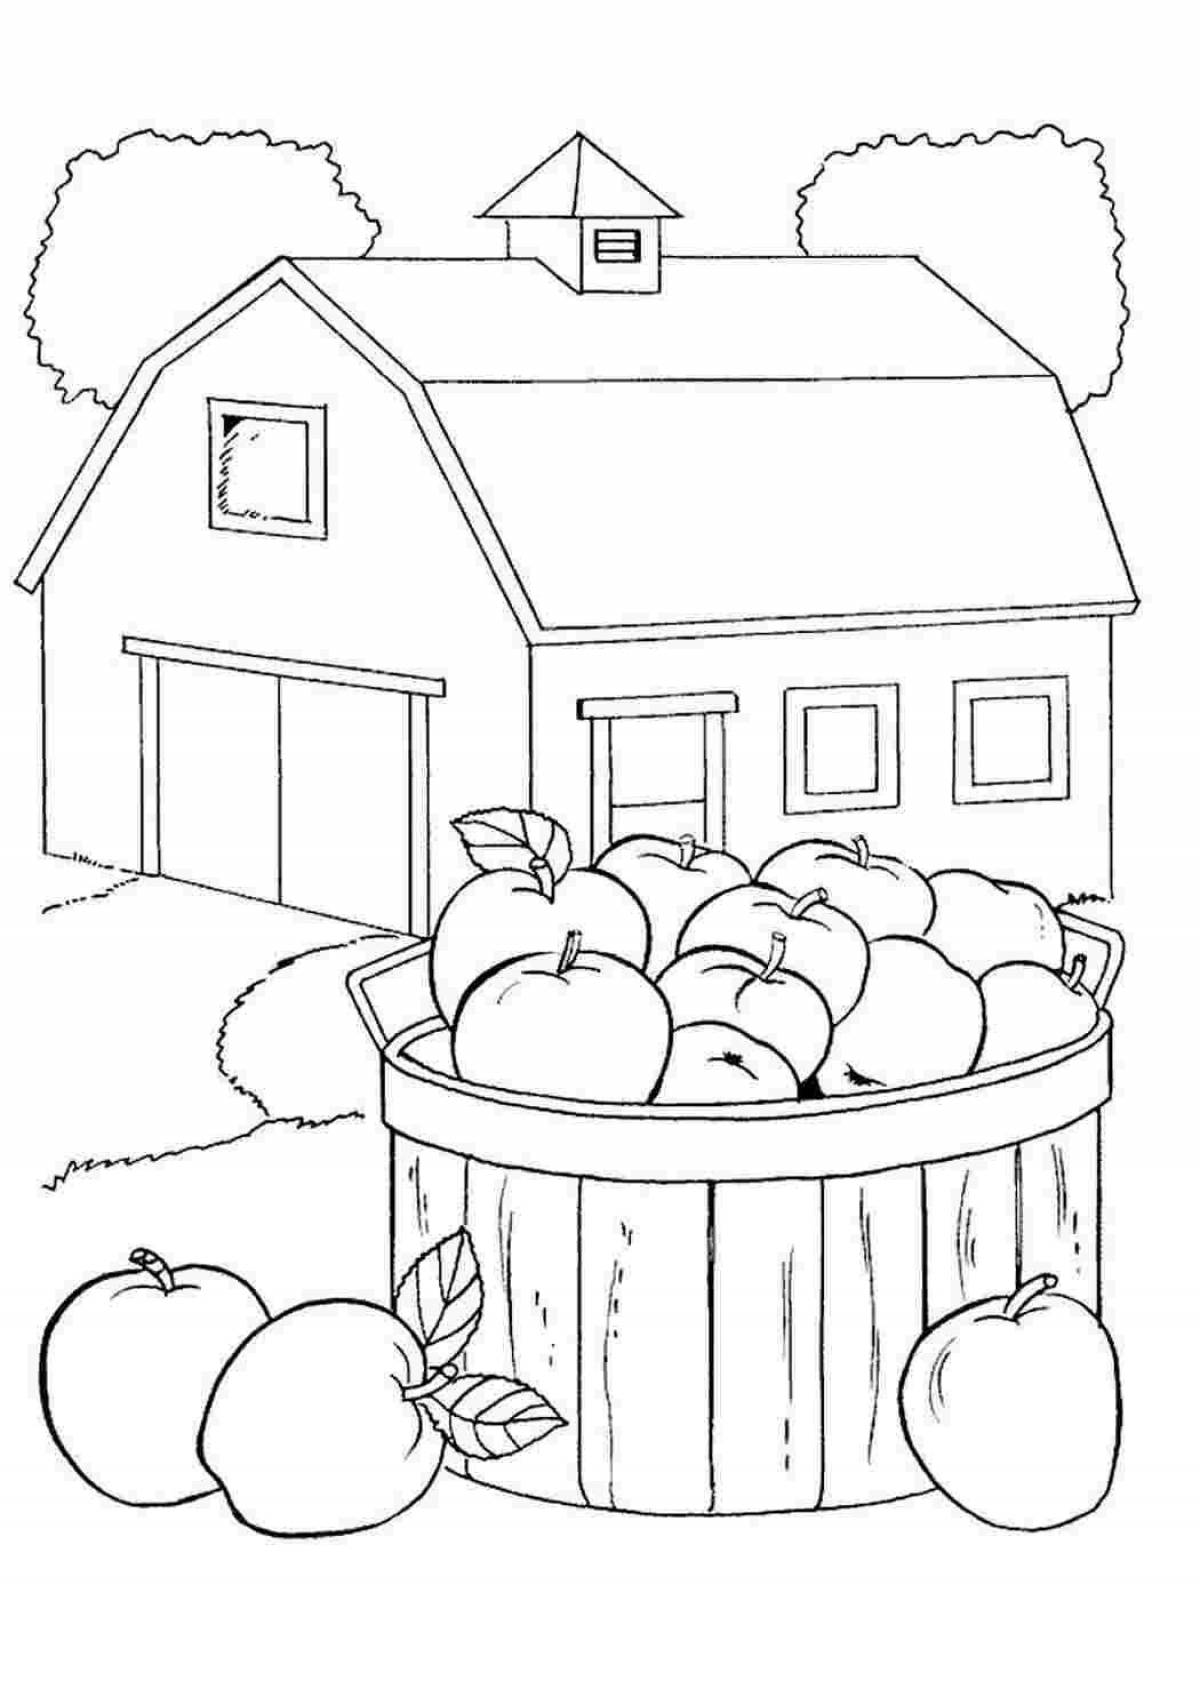 Animated village coloring page